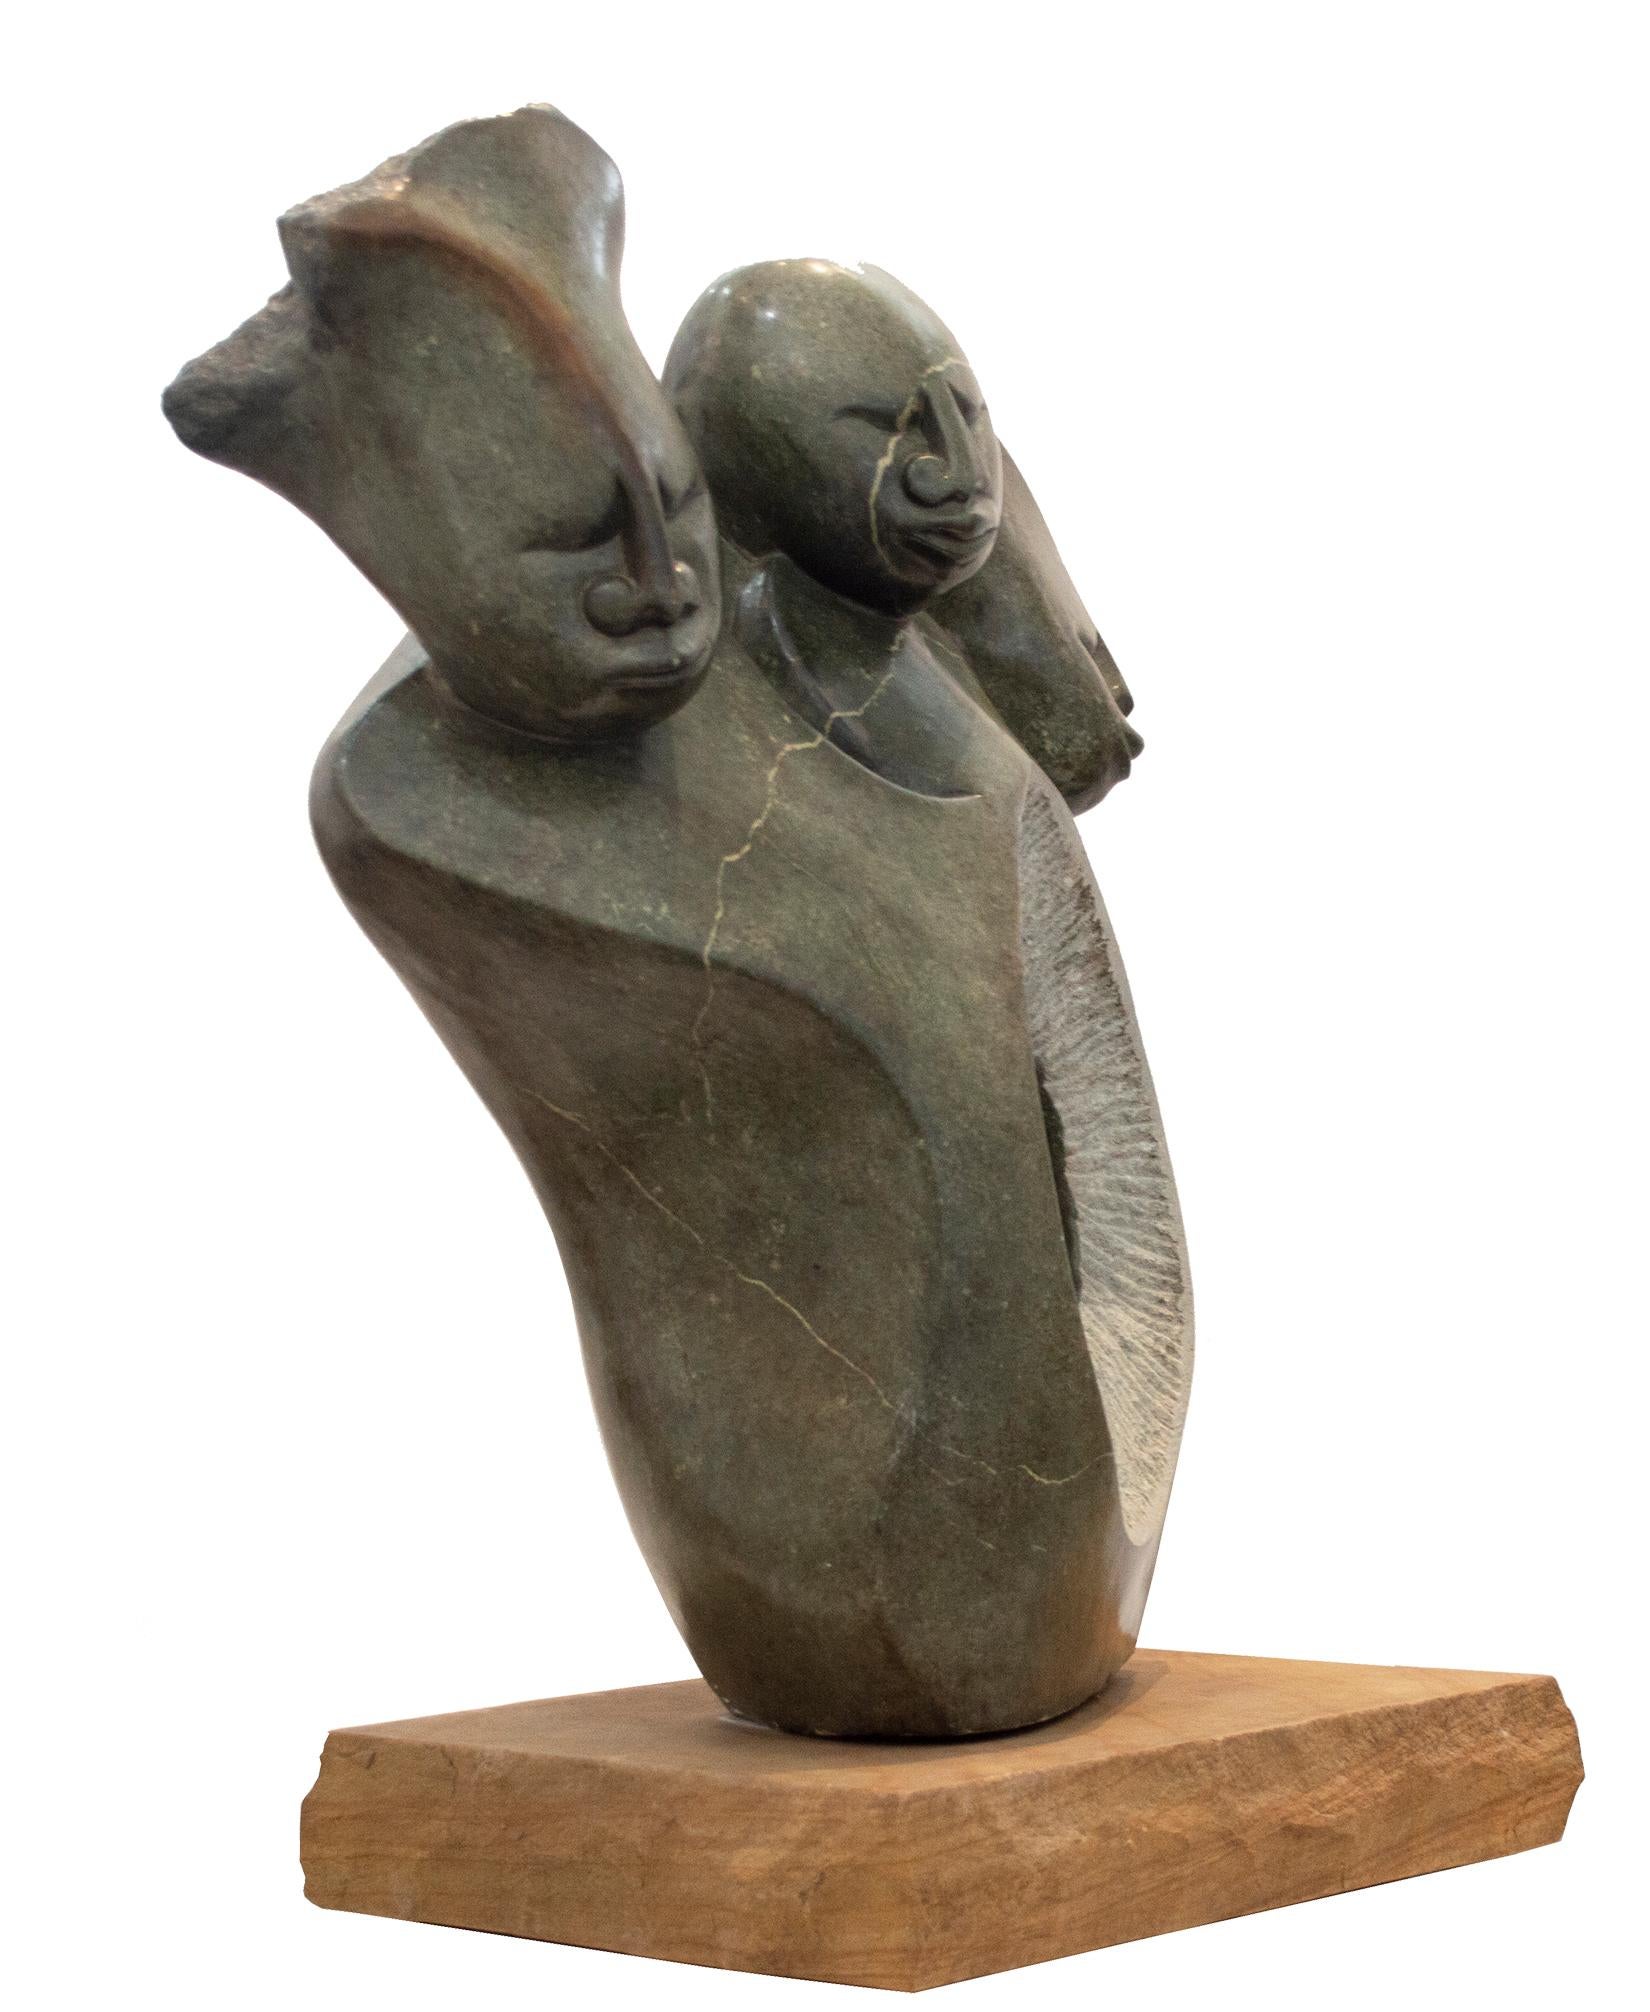 'Sharing One Heart' is an original sculpture carved from opal serpentine by the Zimbabwean artist Tichona Nyakambangwe. The sculpture presents three figures grouped together, representing members of a family. Each of their abstracted, mask-like